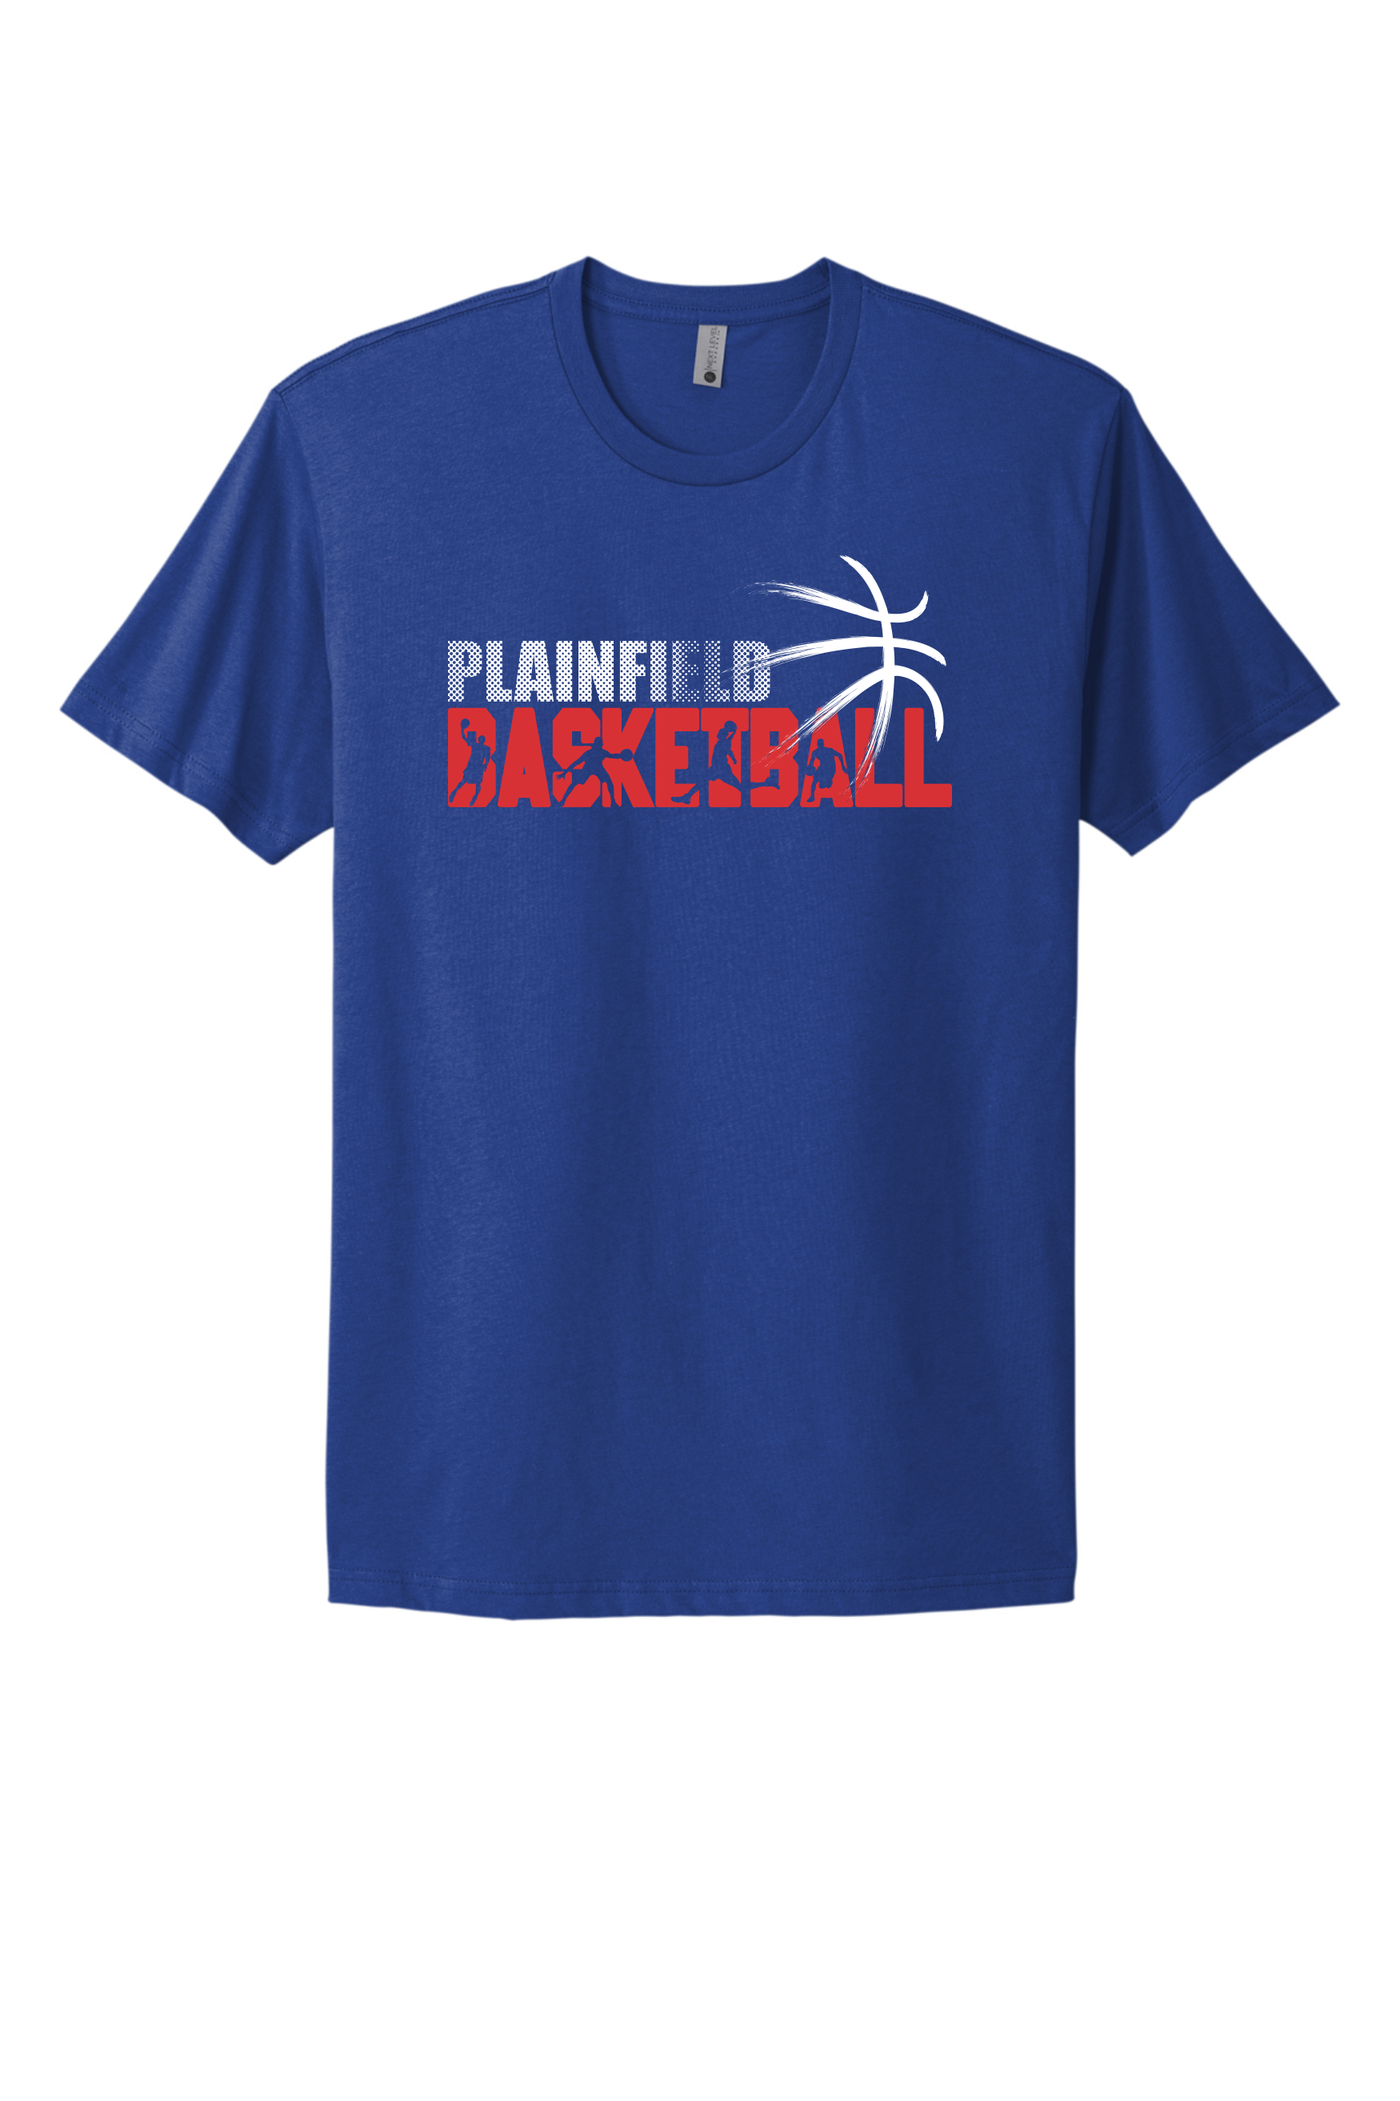 Plainfield Cotton Tee - T3 YOUTH - Y&S Designs, LLC